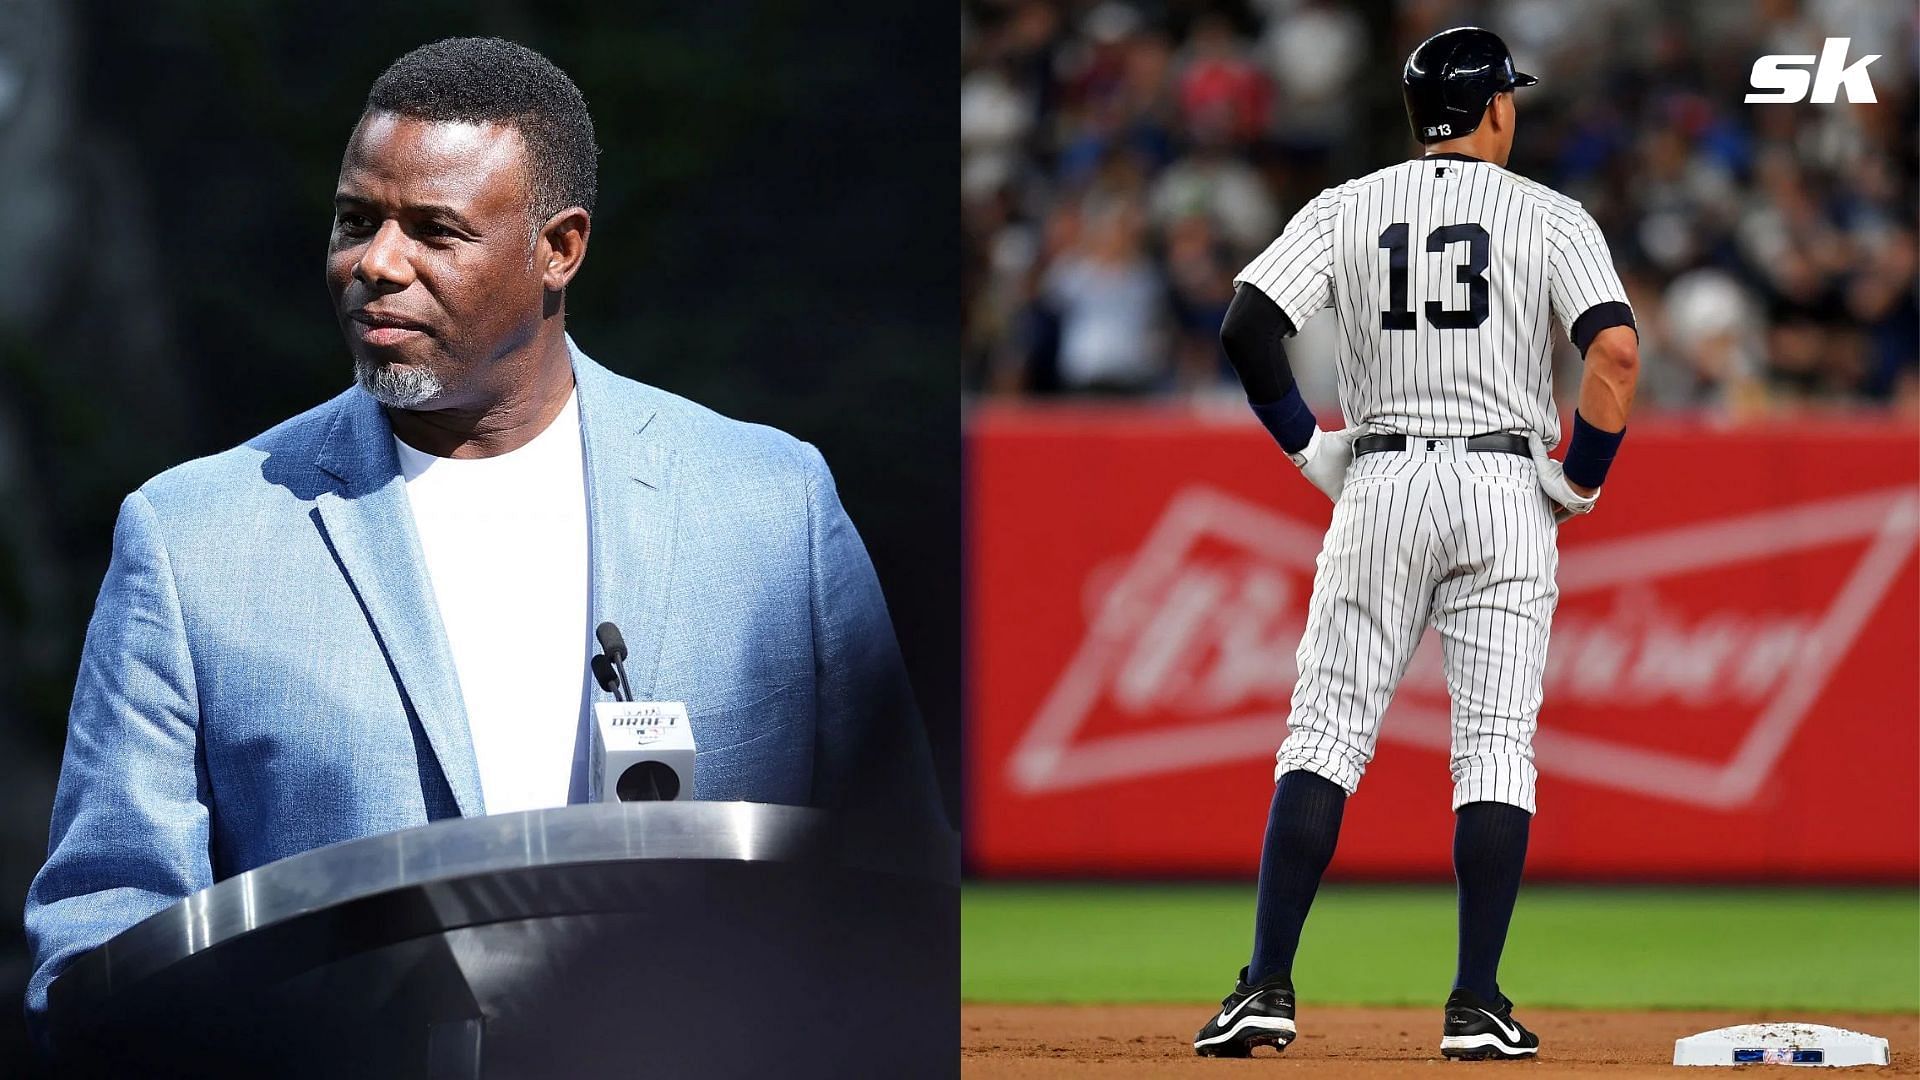 When Alex Rodriguez tarnished his special bond with Mariners icon Ken Griffey Jr. by joining the Yankees